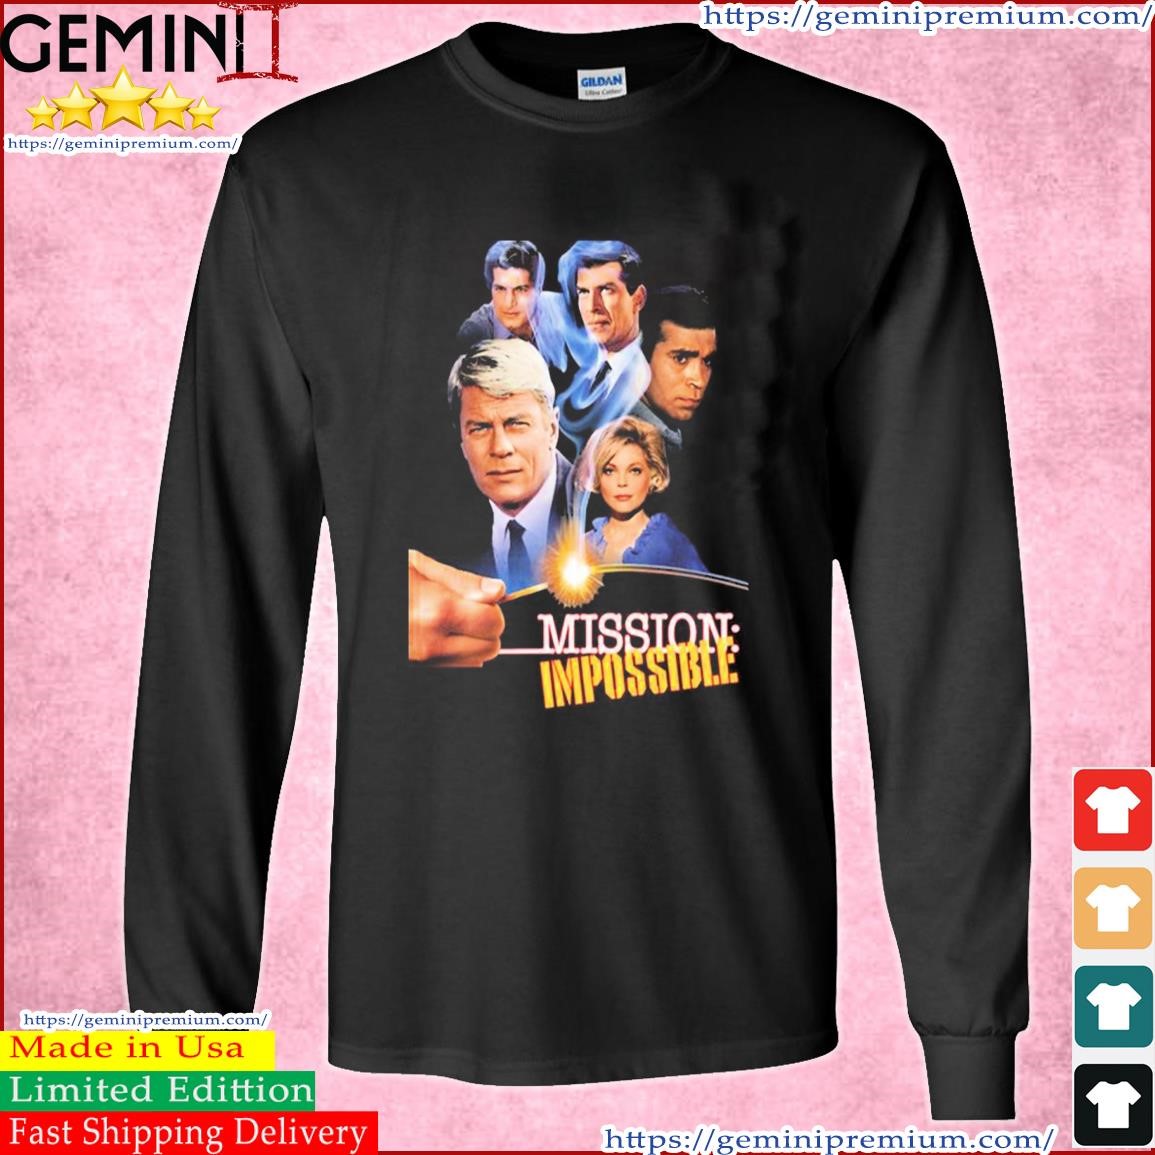 Retro Impossible Mission 60s Cast Tribute Shirt Long Sleeve Tee.jpg